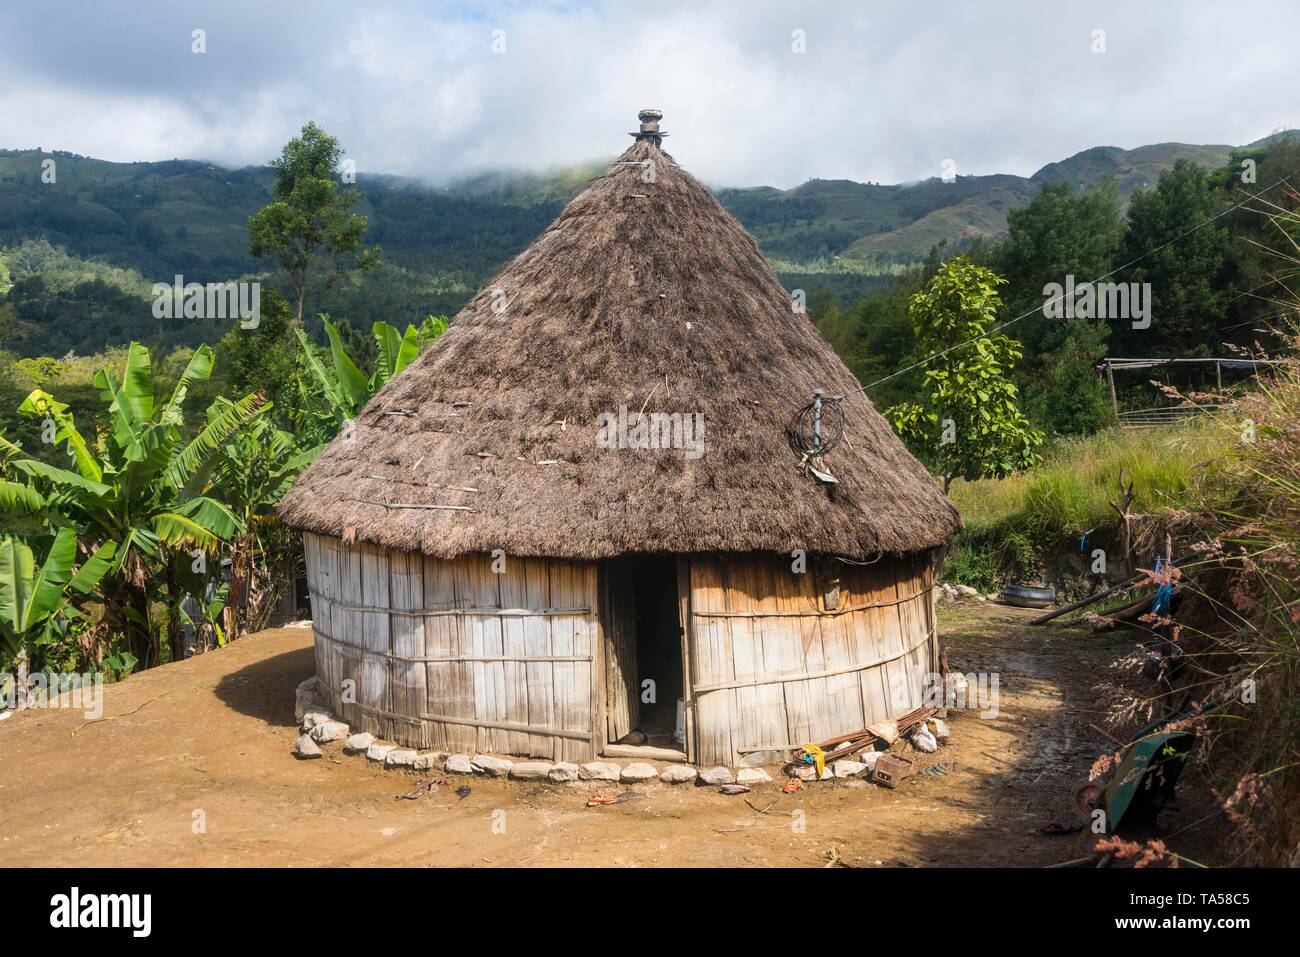 Traditional reed hut with banana plants around in the mountains of Maubisse, East Timor Stock Photo